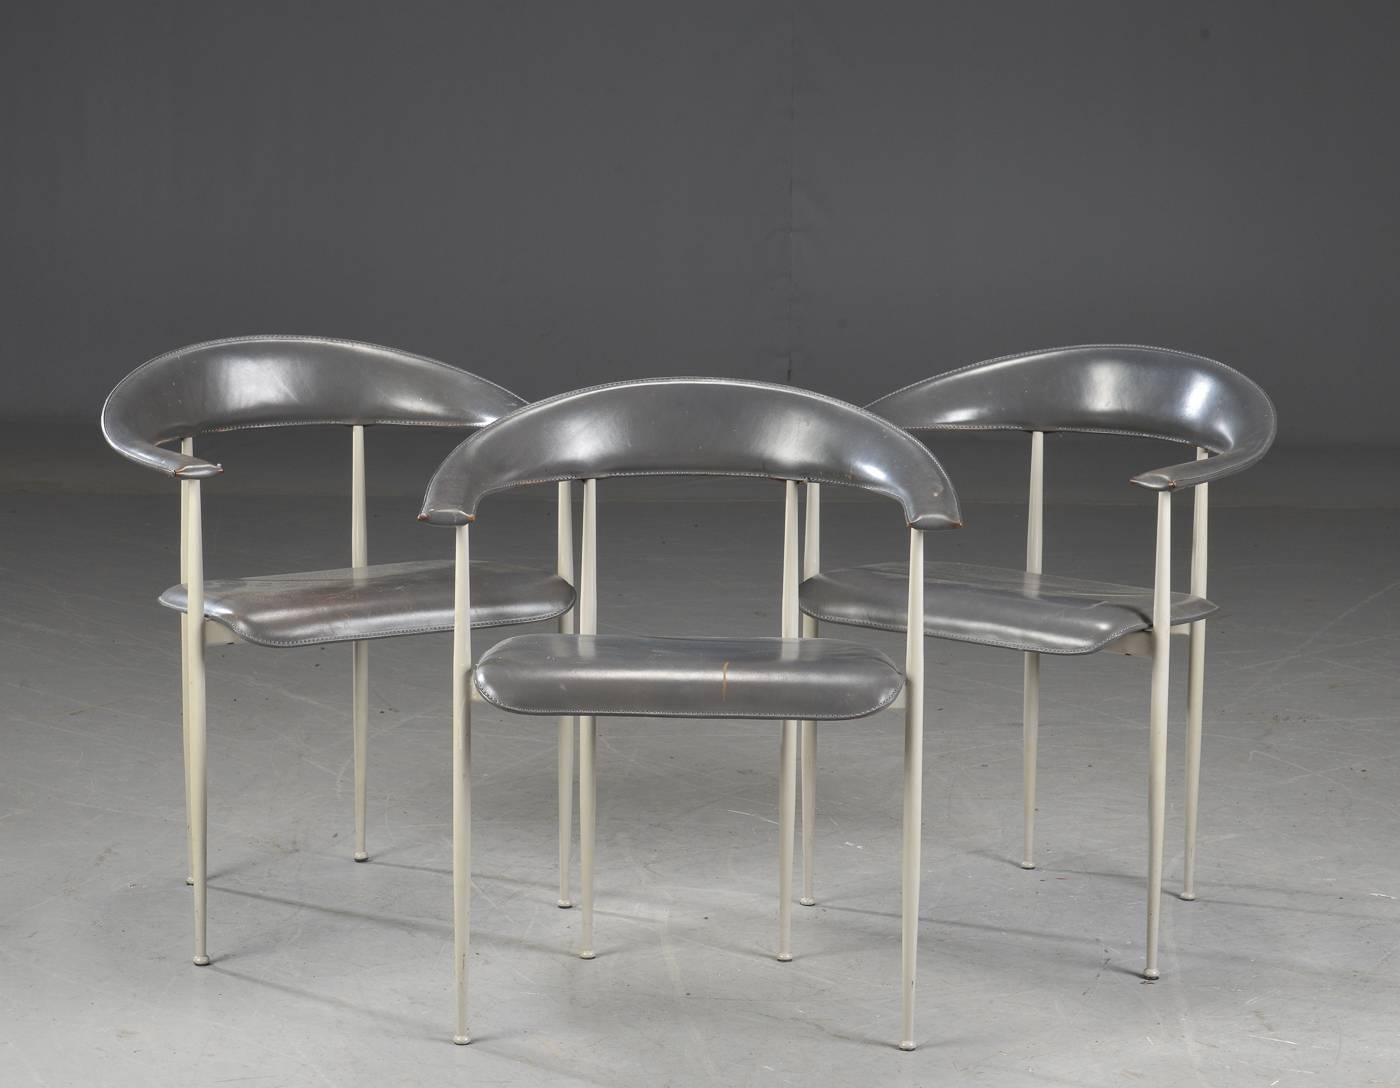 Armchairs, lacquered metal frame, upholstered with patinated gray leather. Measure: Seat height 45 cm.
Signs of wear, marks and wear.
Delivery item 2-3 weeks.